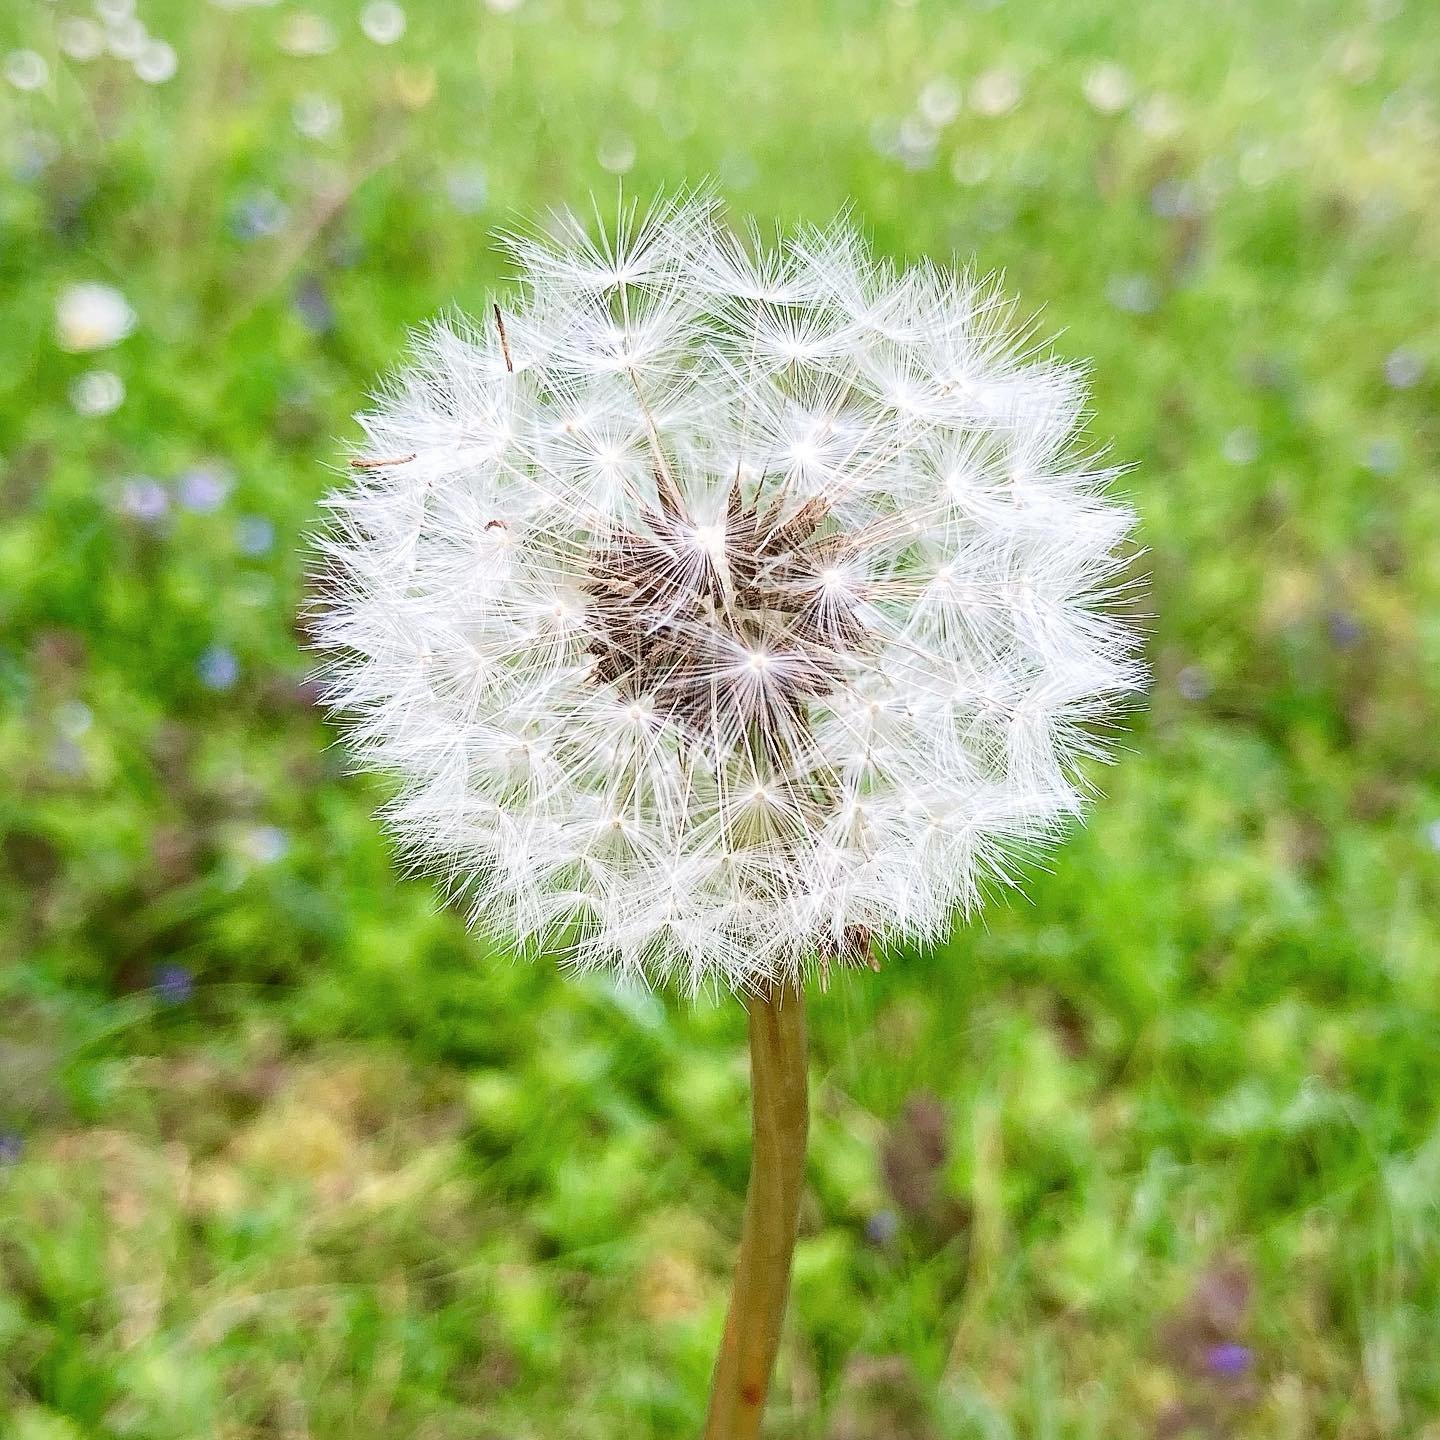 There is something so beautiful about an early morning dandelion clock, with it&rsquo;s perfect sphere and delicate seeds, before the wind captures them and lifts them away #dandelionclock #springnature #delicate #printinspiration #naturalworld #bath